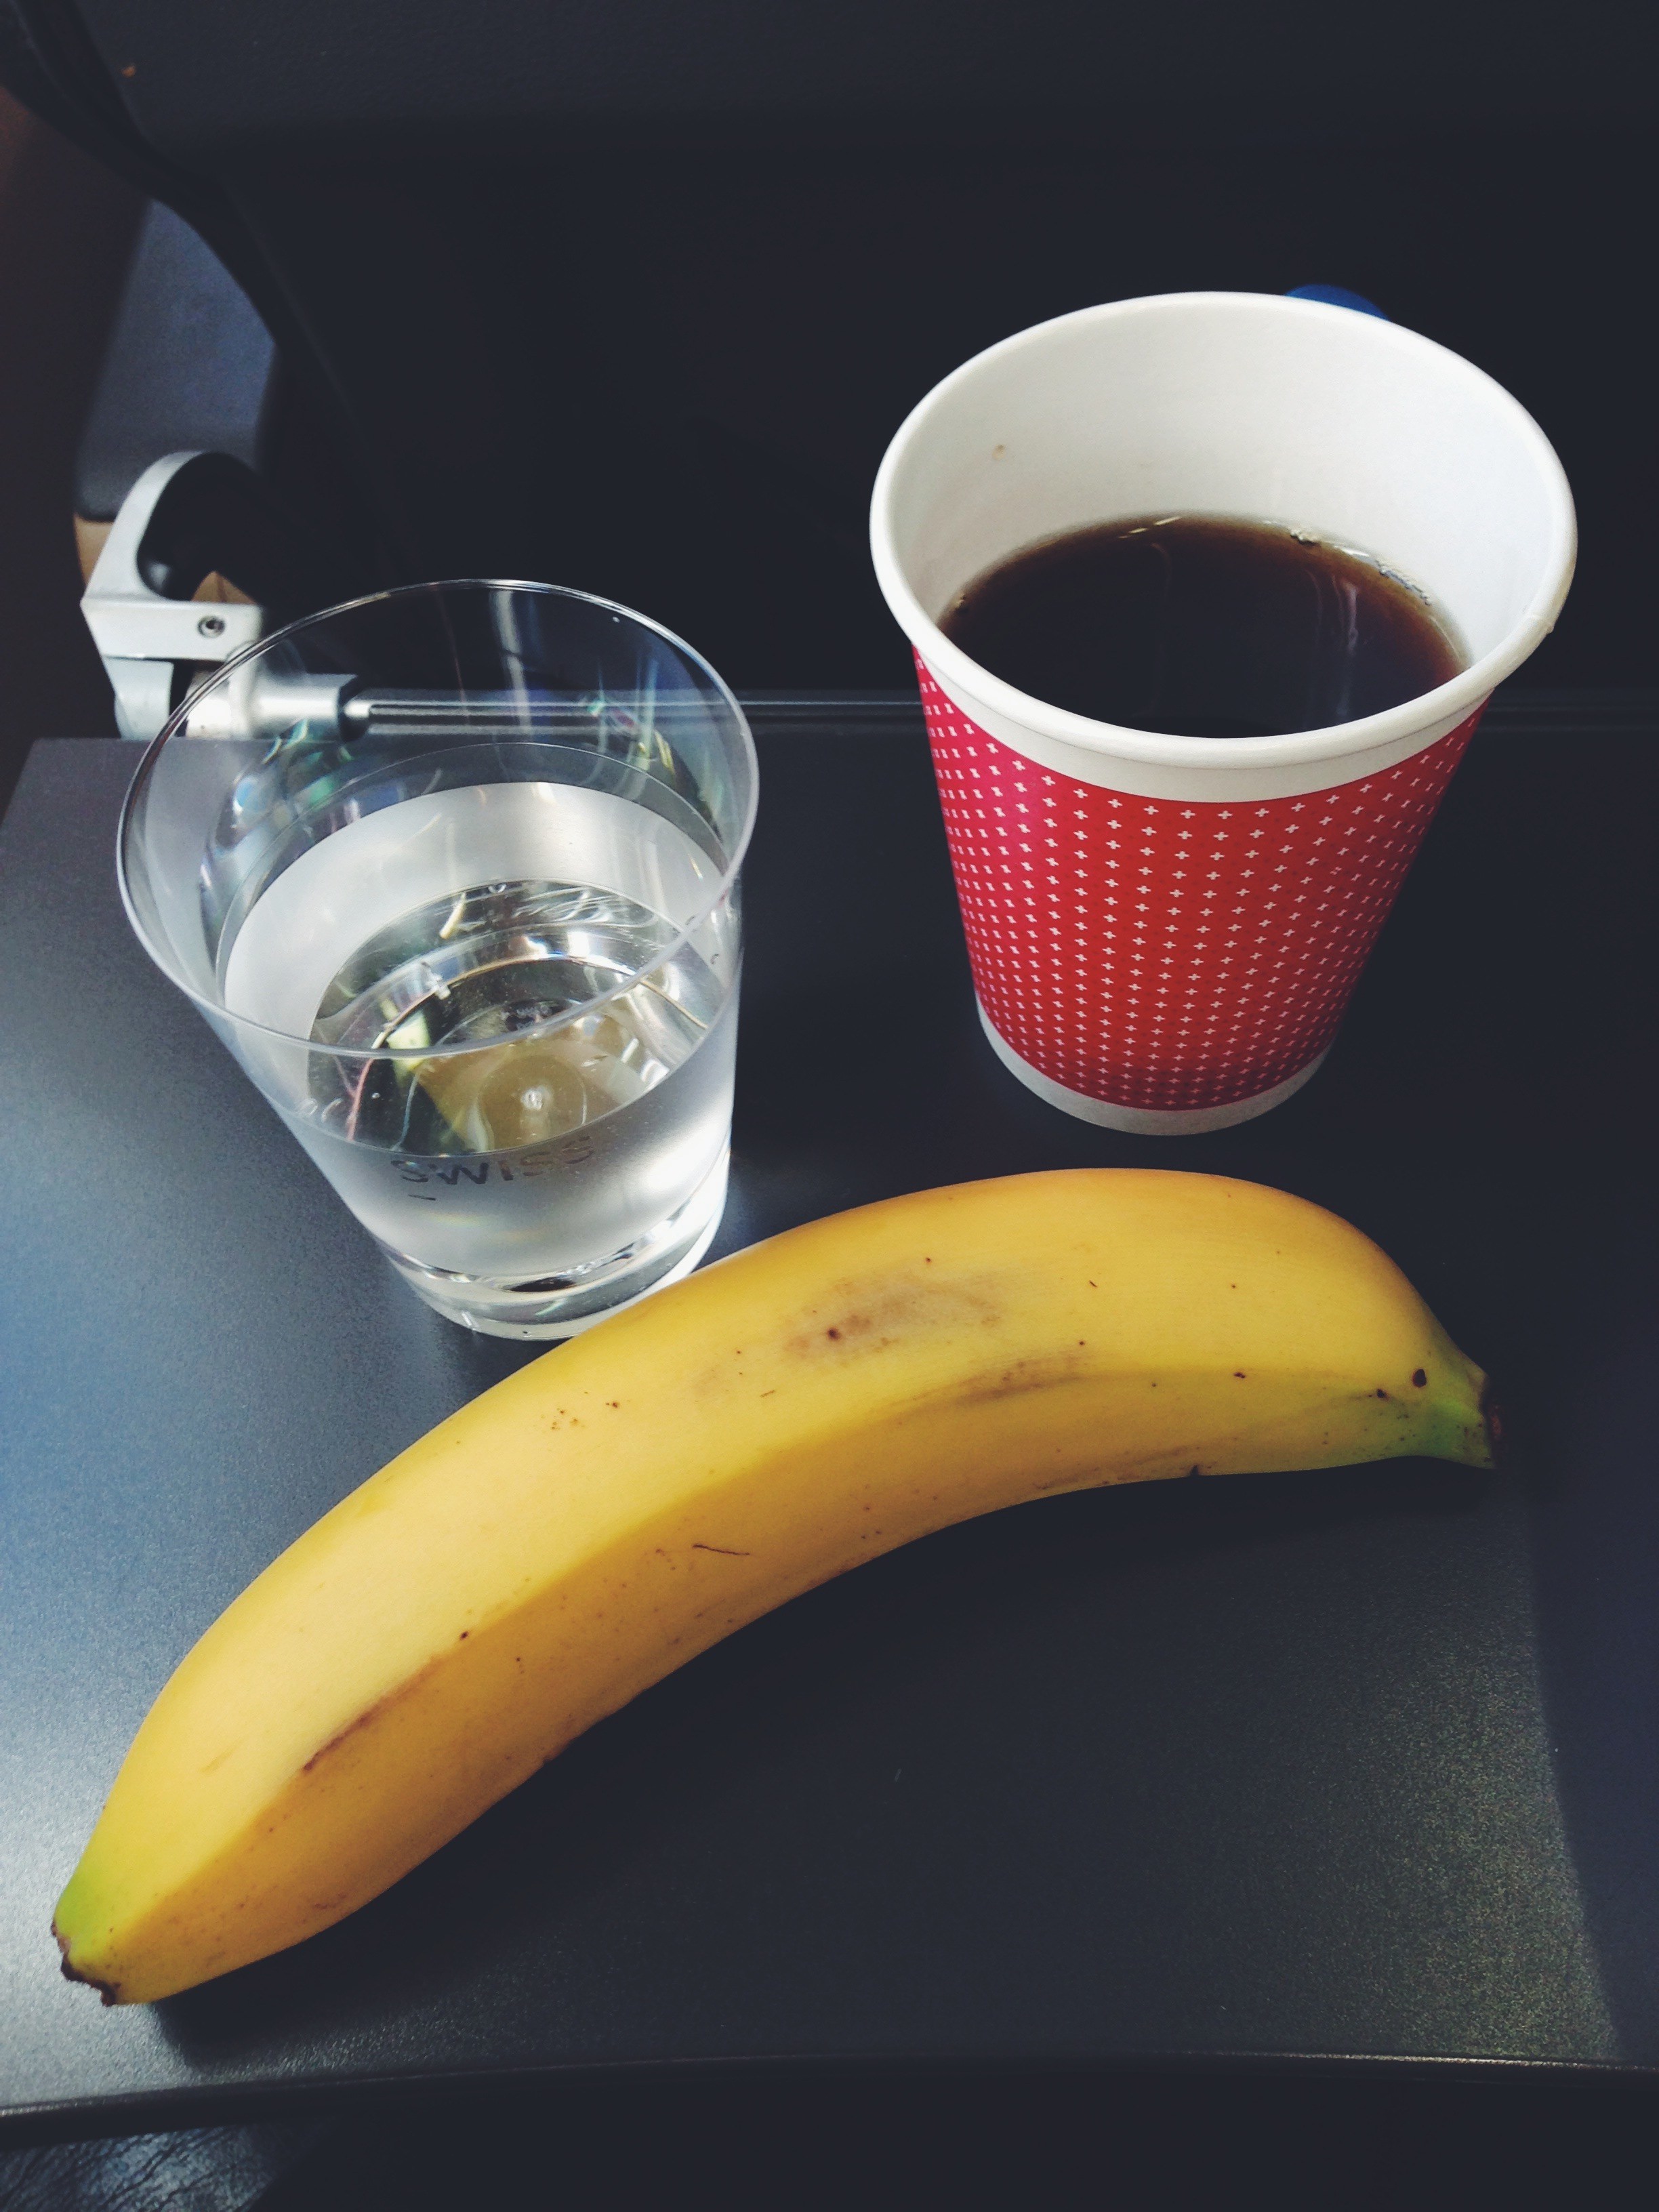 Enjoy your meal: Traveling with fructose malabsorption